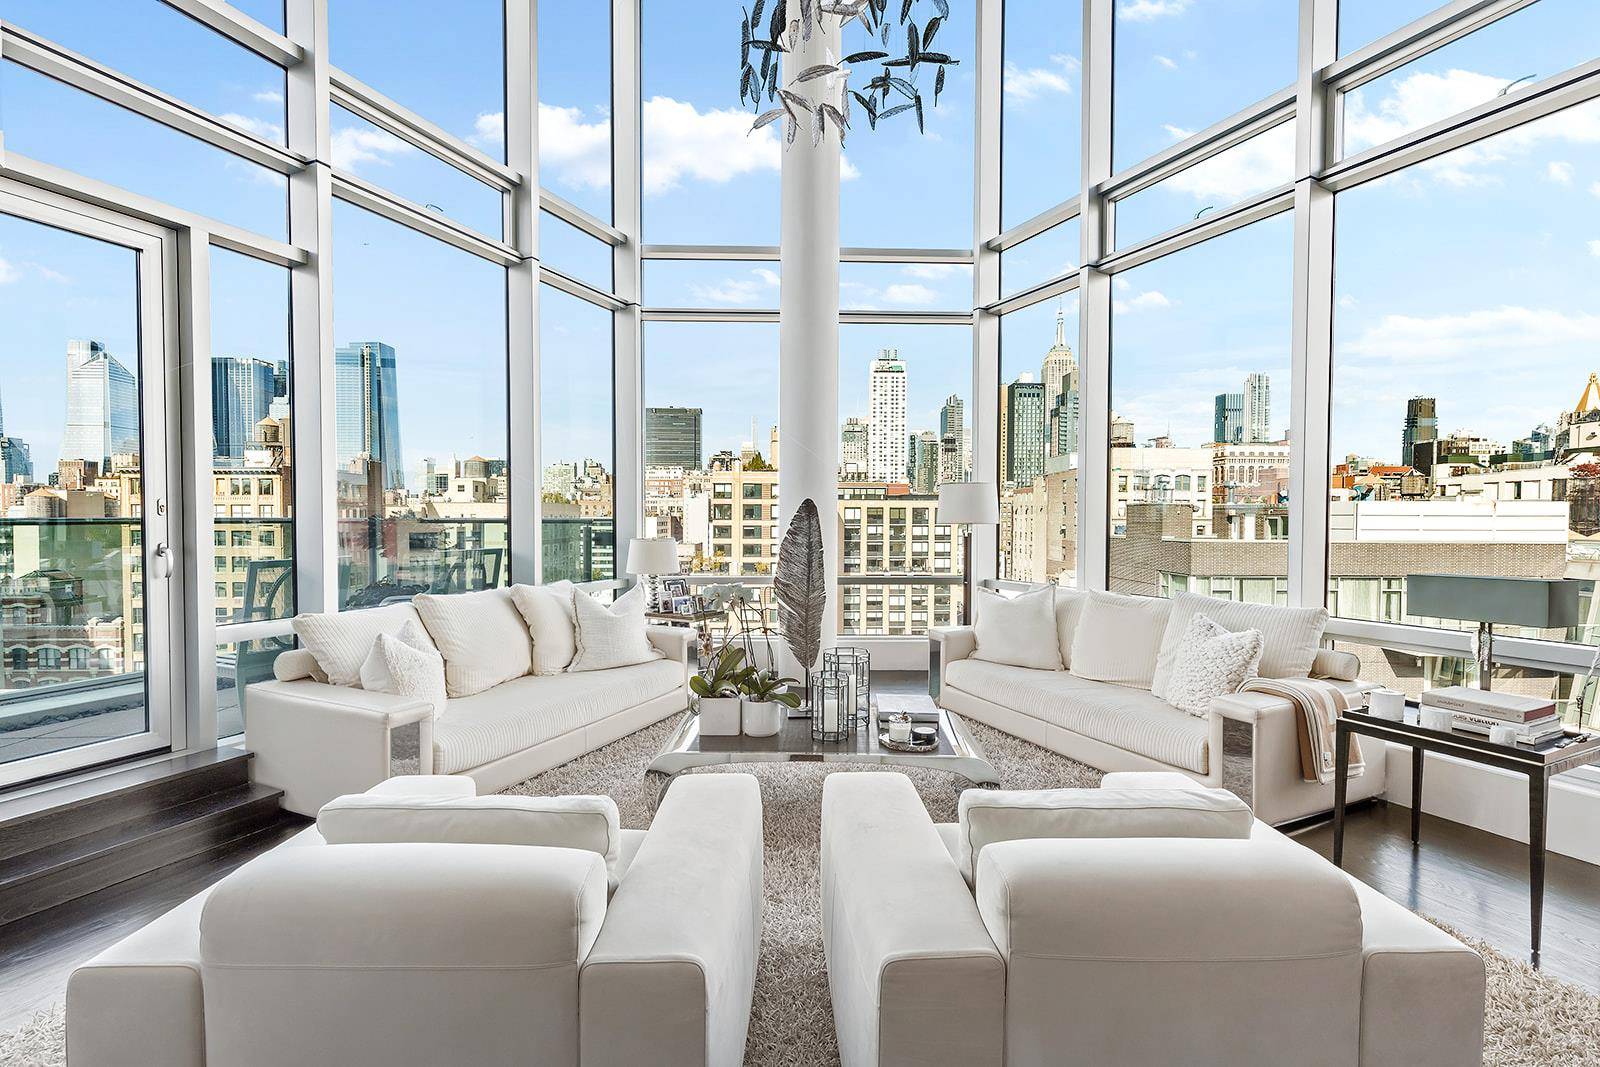 Delivering unprecedented space, light and luxury, this impeccable 3 bedroom triplex penthouse loft is a truly rare Chelsea offering in an amenity rich building.